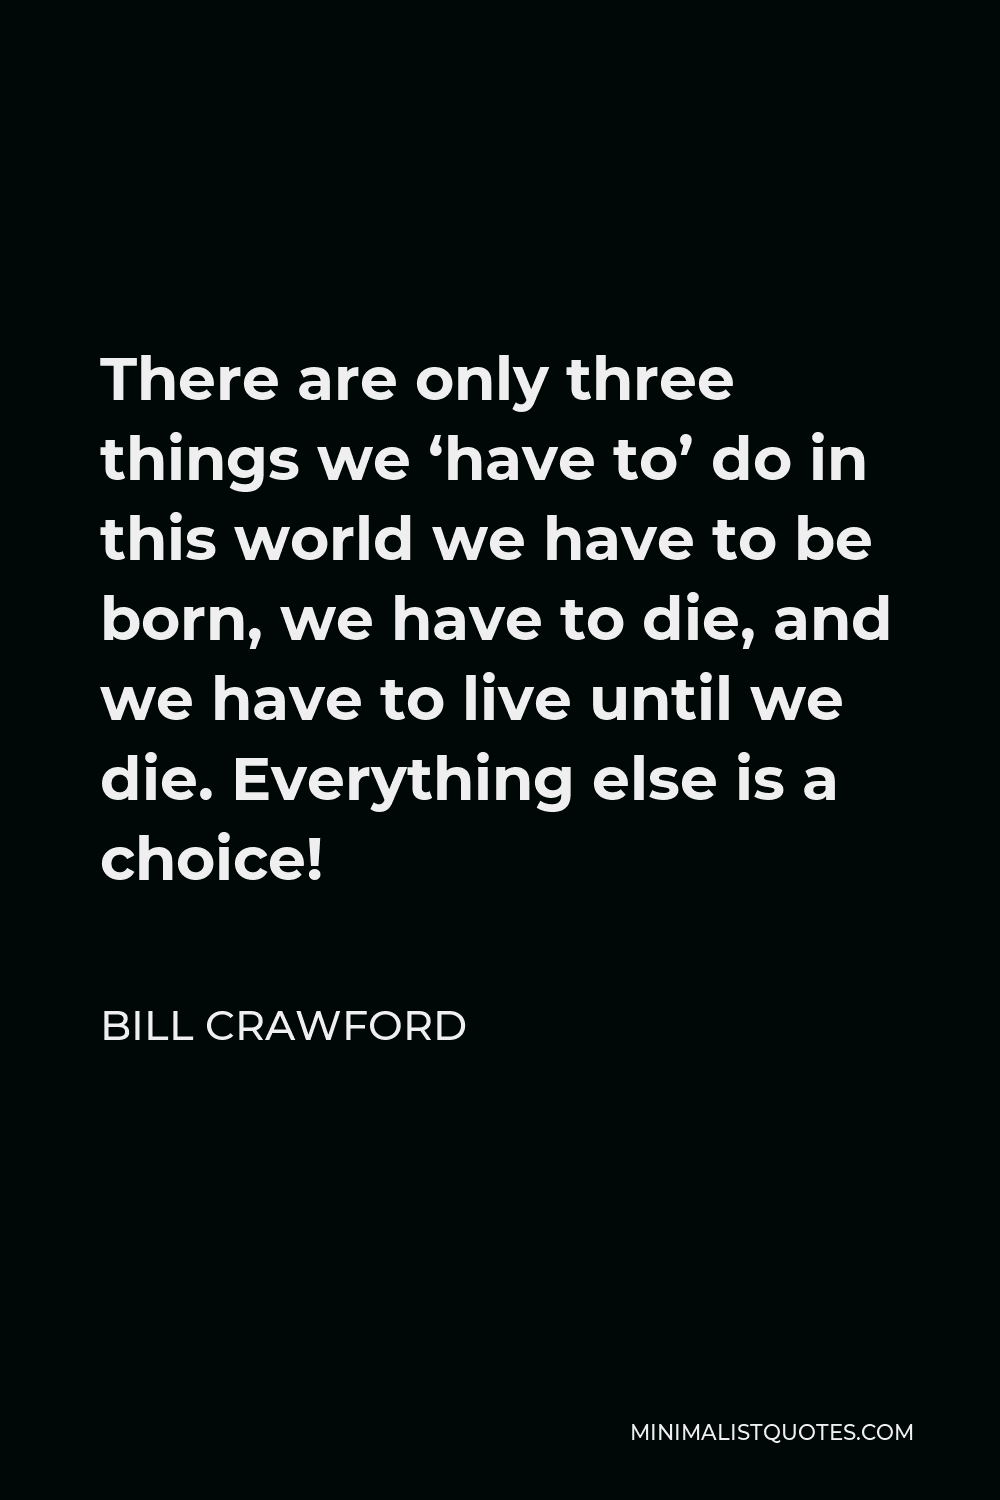 Bill Crawford Quote - There are only three things we ‘have to’ do in this world we have to be born, we have to die, and we have to live until we die. Everything else is a choice!